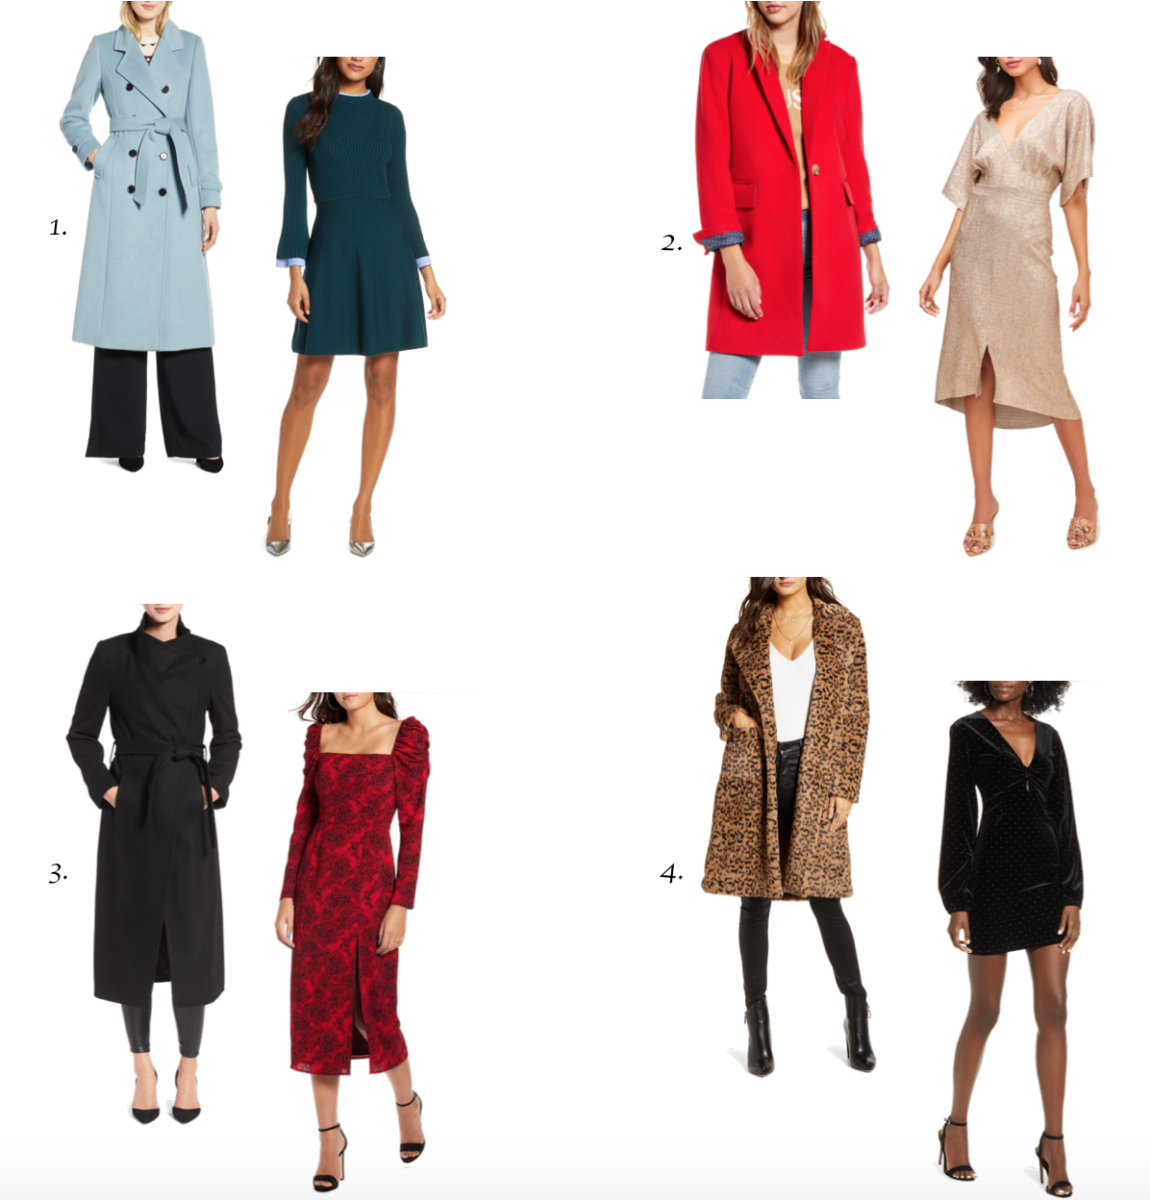 Fall Wedding Guest Dresses With Coordinating Jackets - The Miller